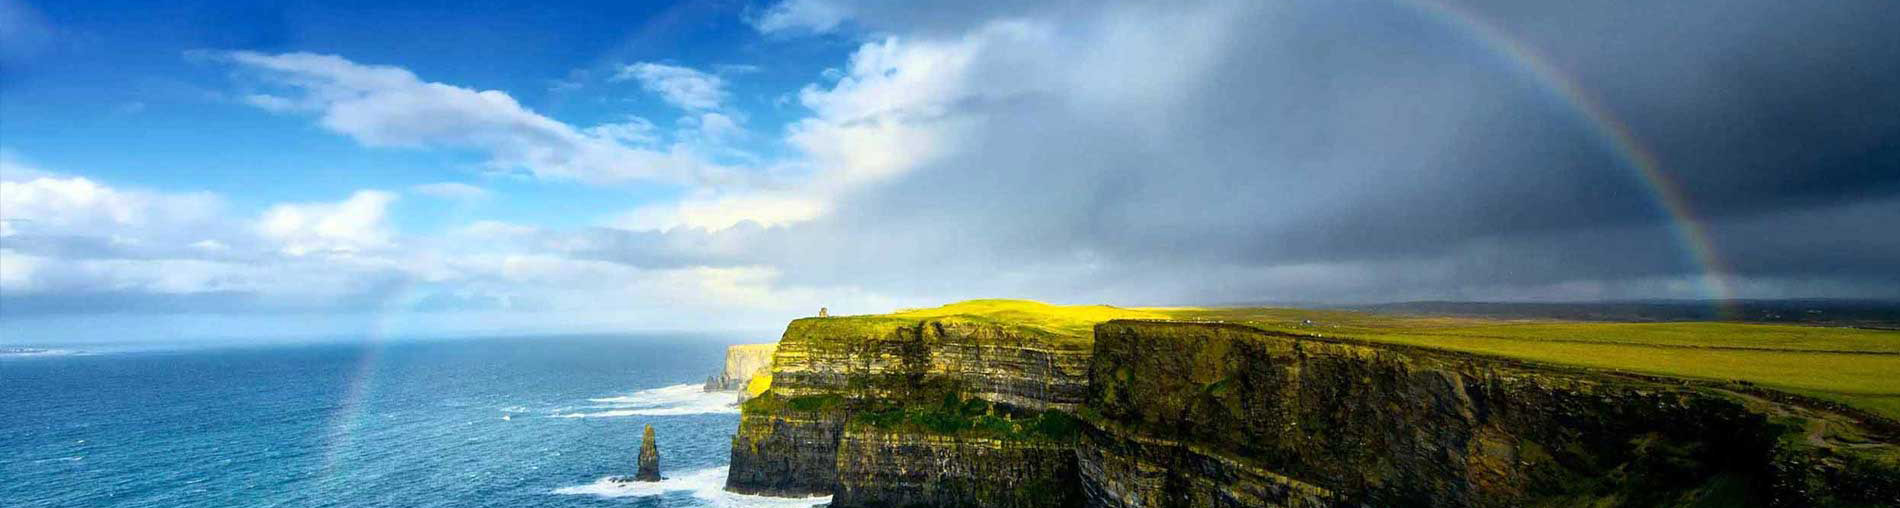 Most Popular Ireland Tour Packages